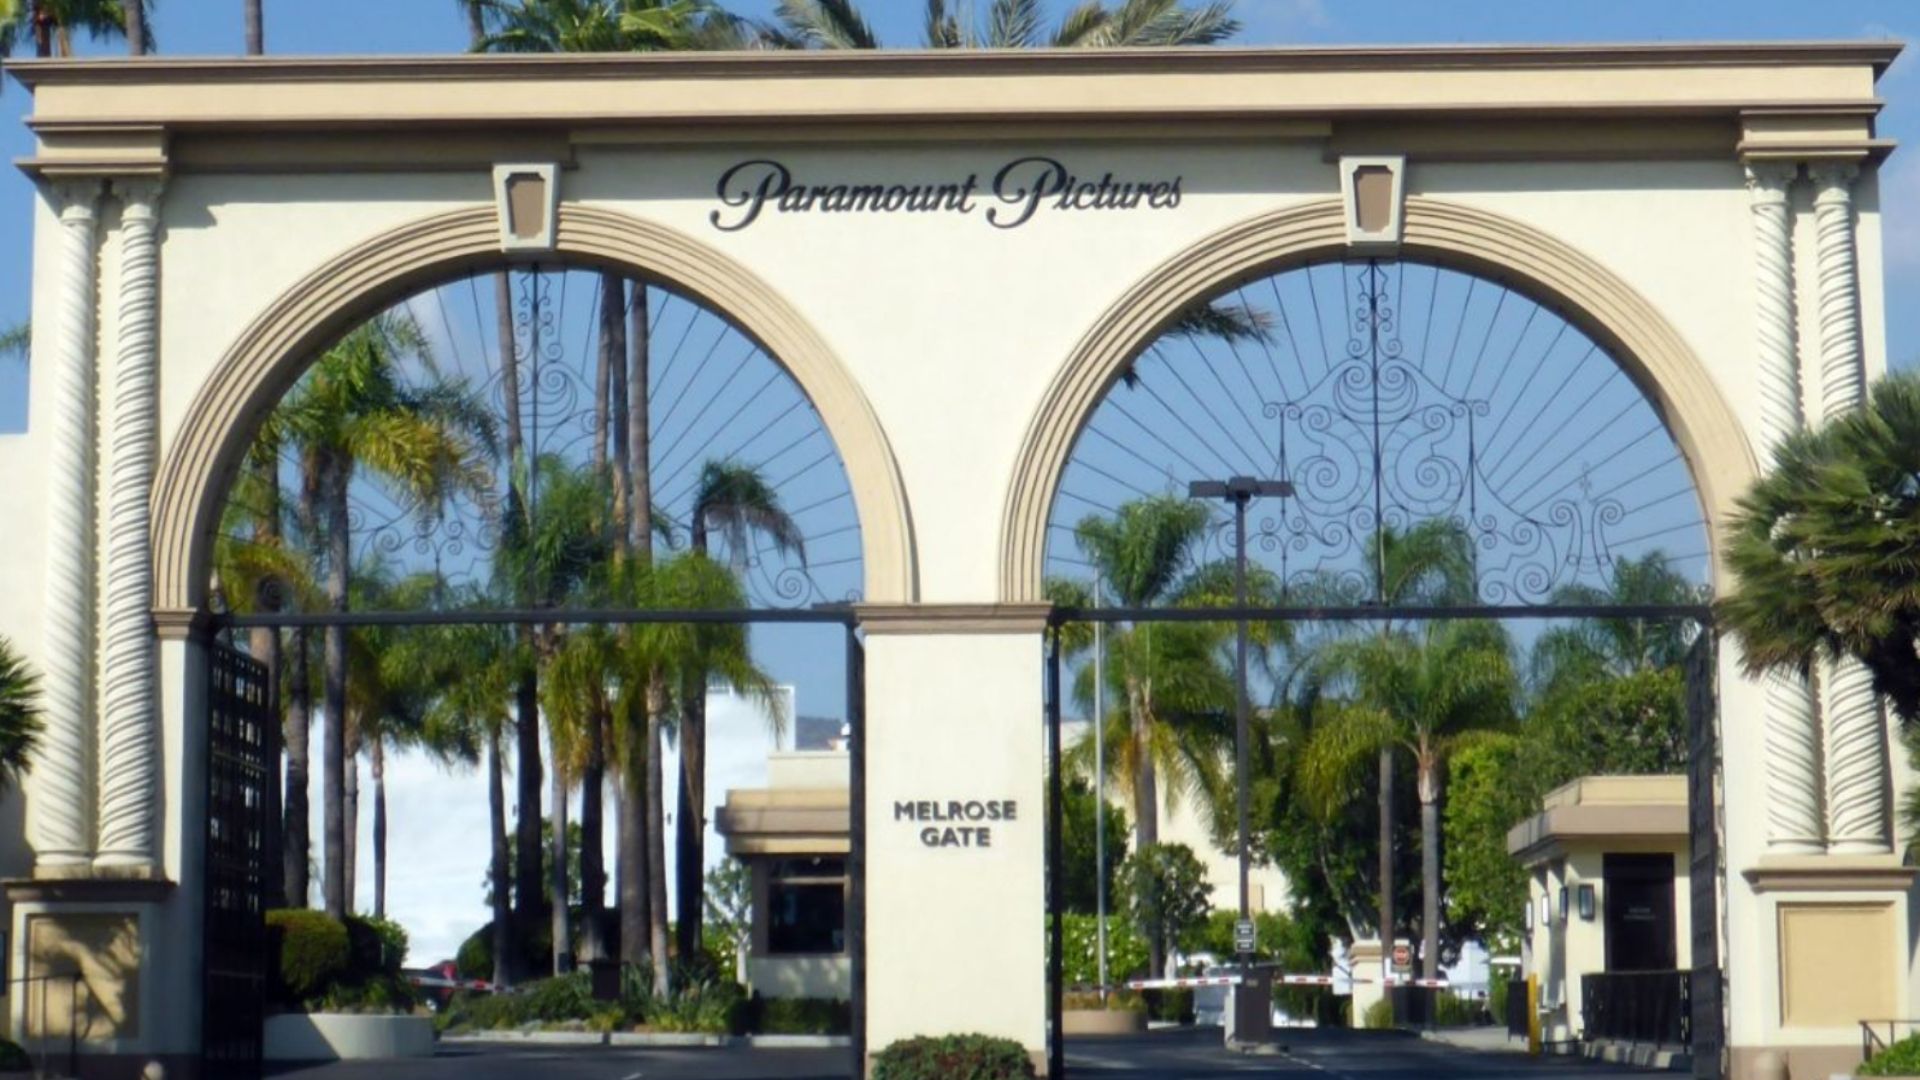 Paramount Pictures (Paramount Global) lot in Los Angeles, California